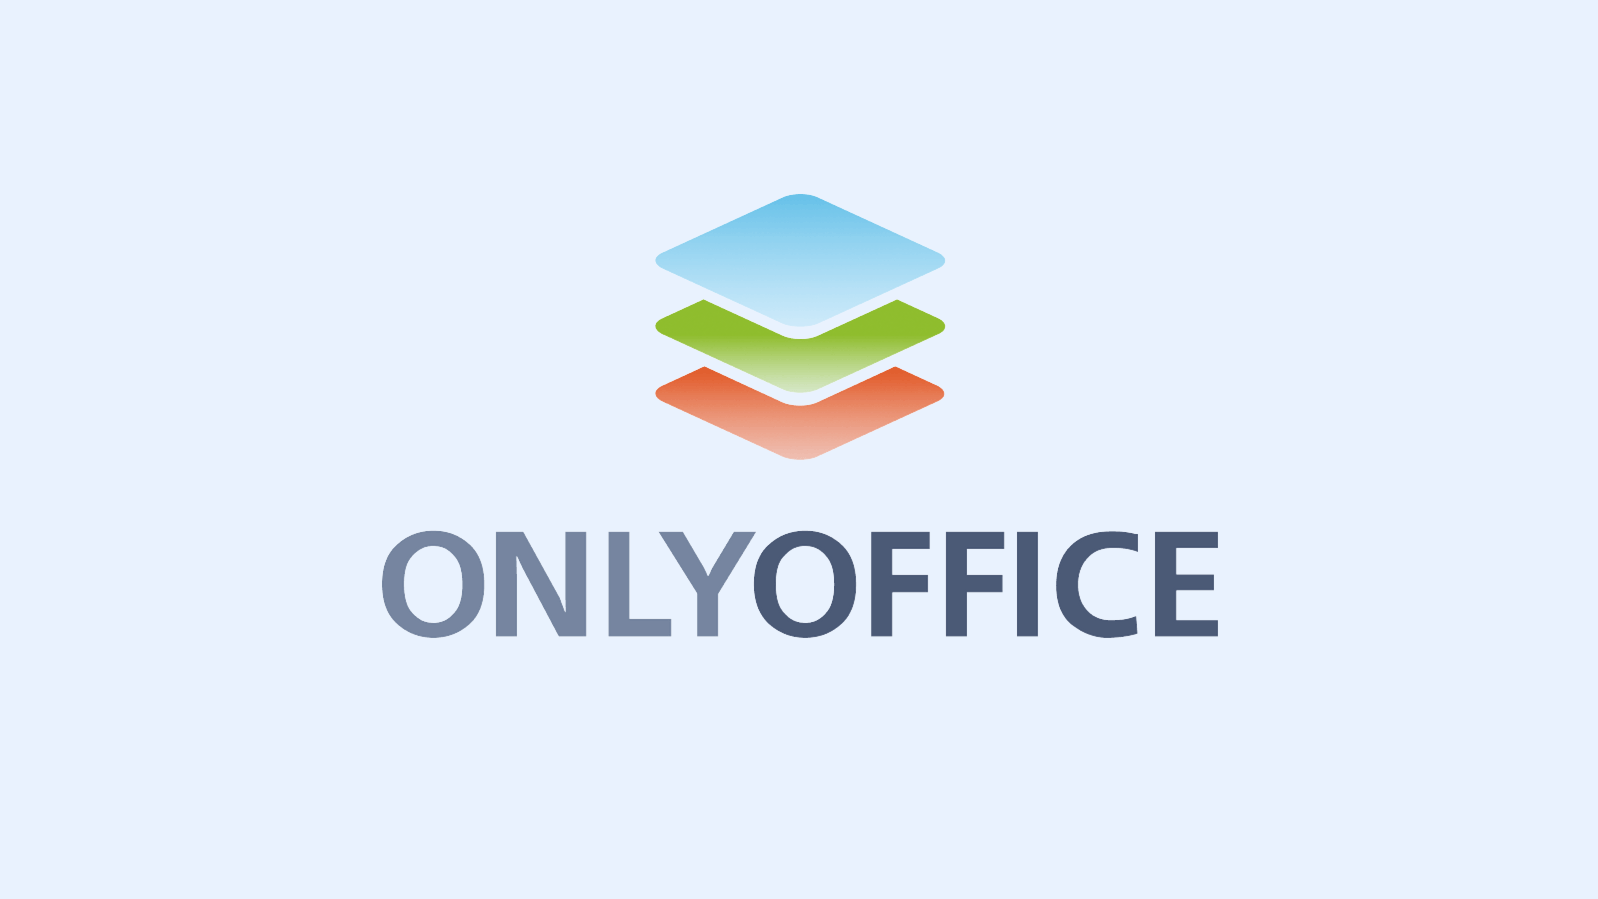 download the last version for android ONLYOFFICE 7.4.1.36